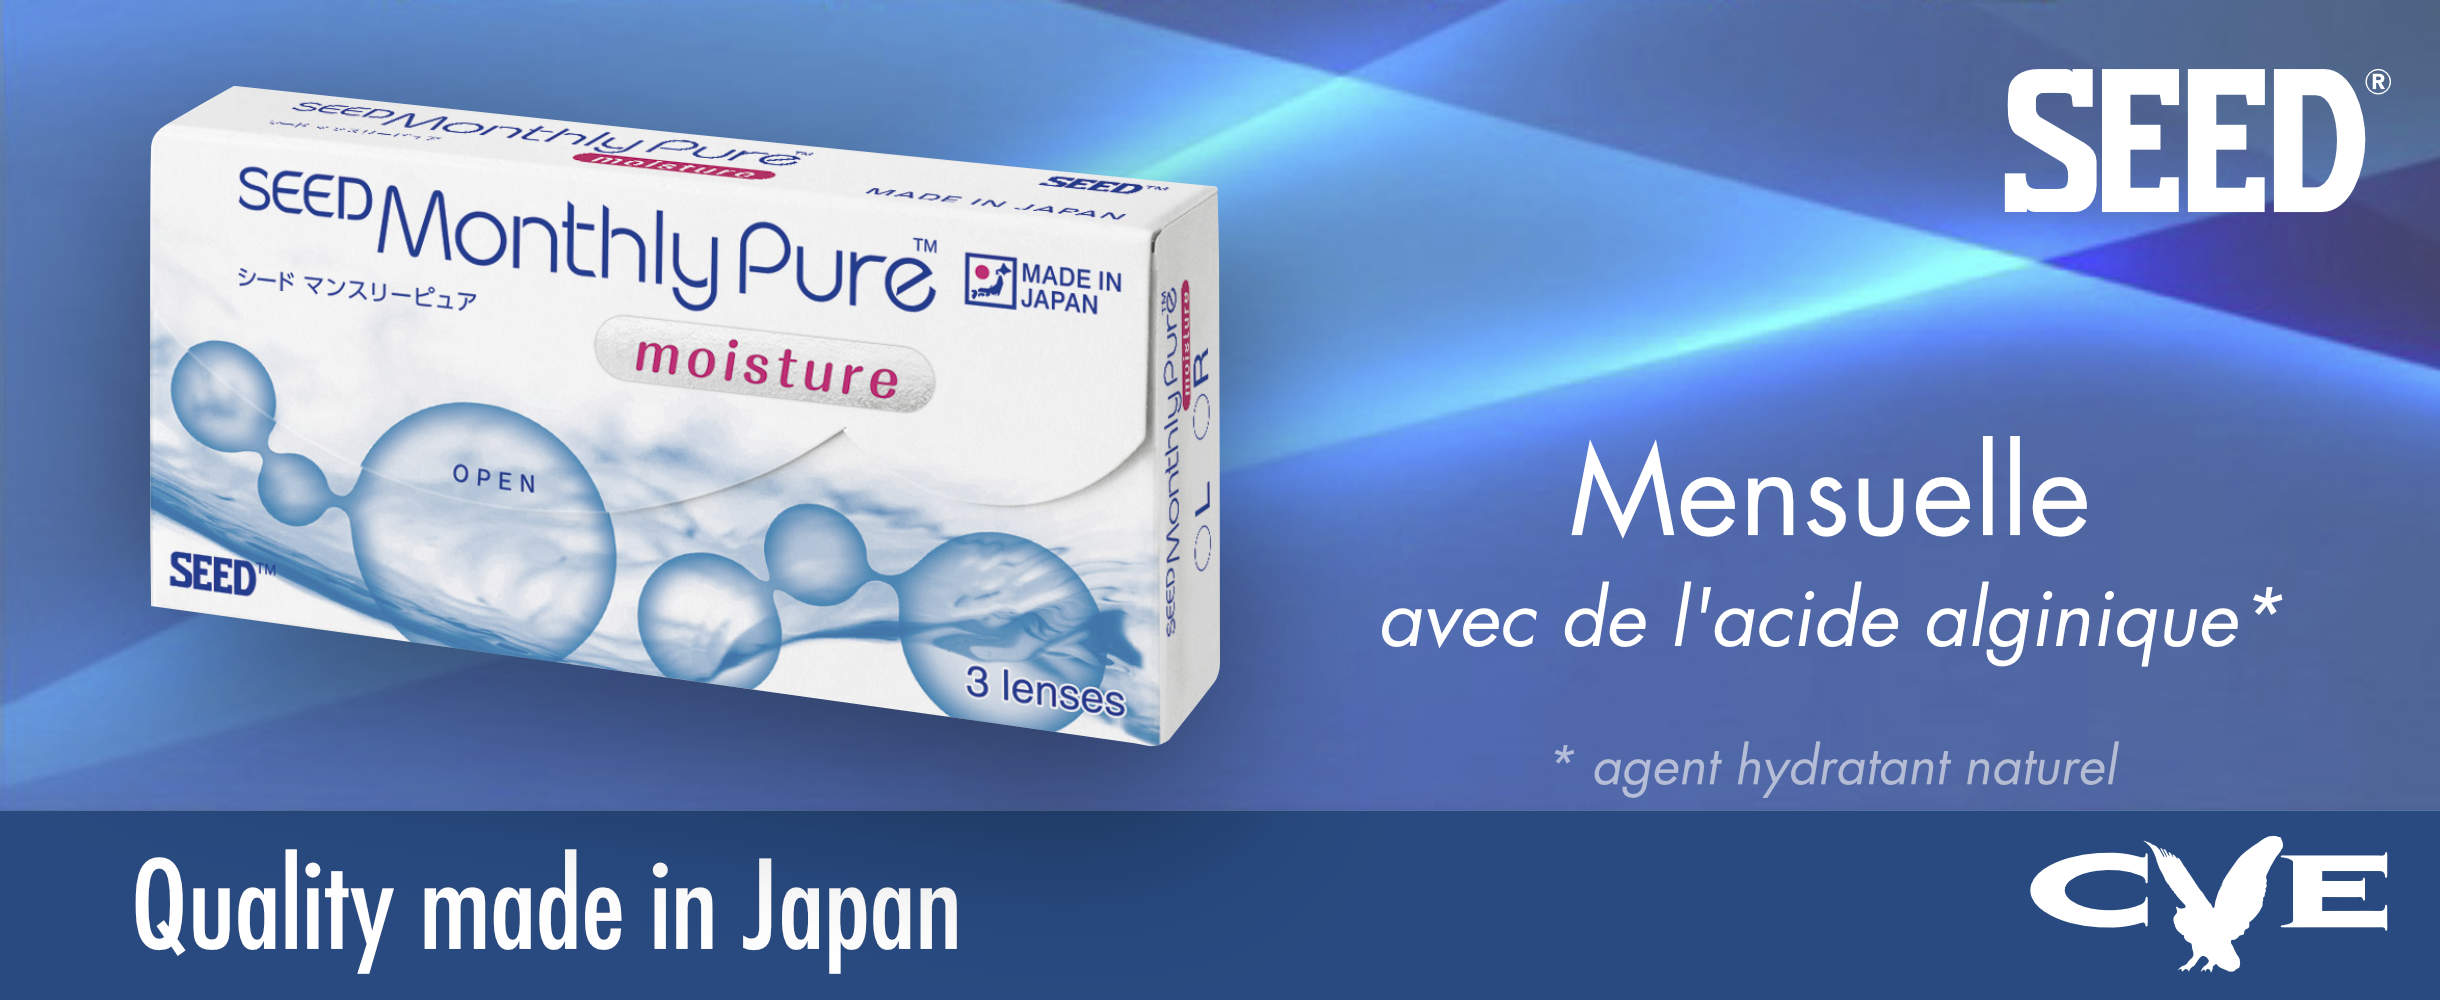 SEED monthly pure - Lentille mensuelle